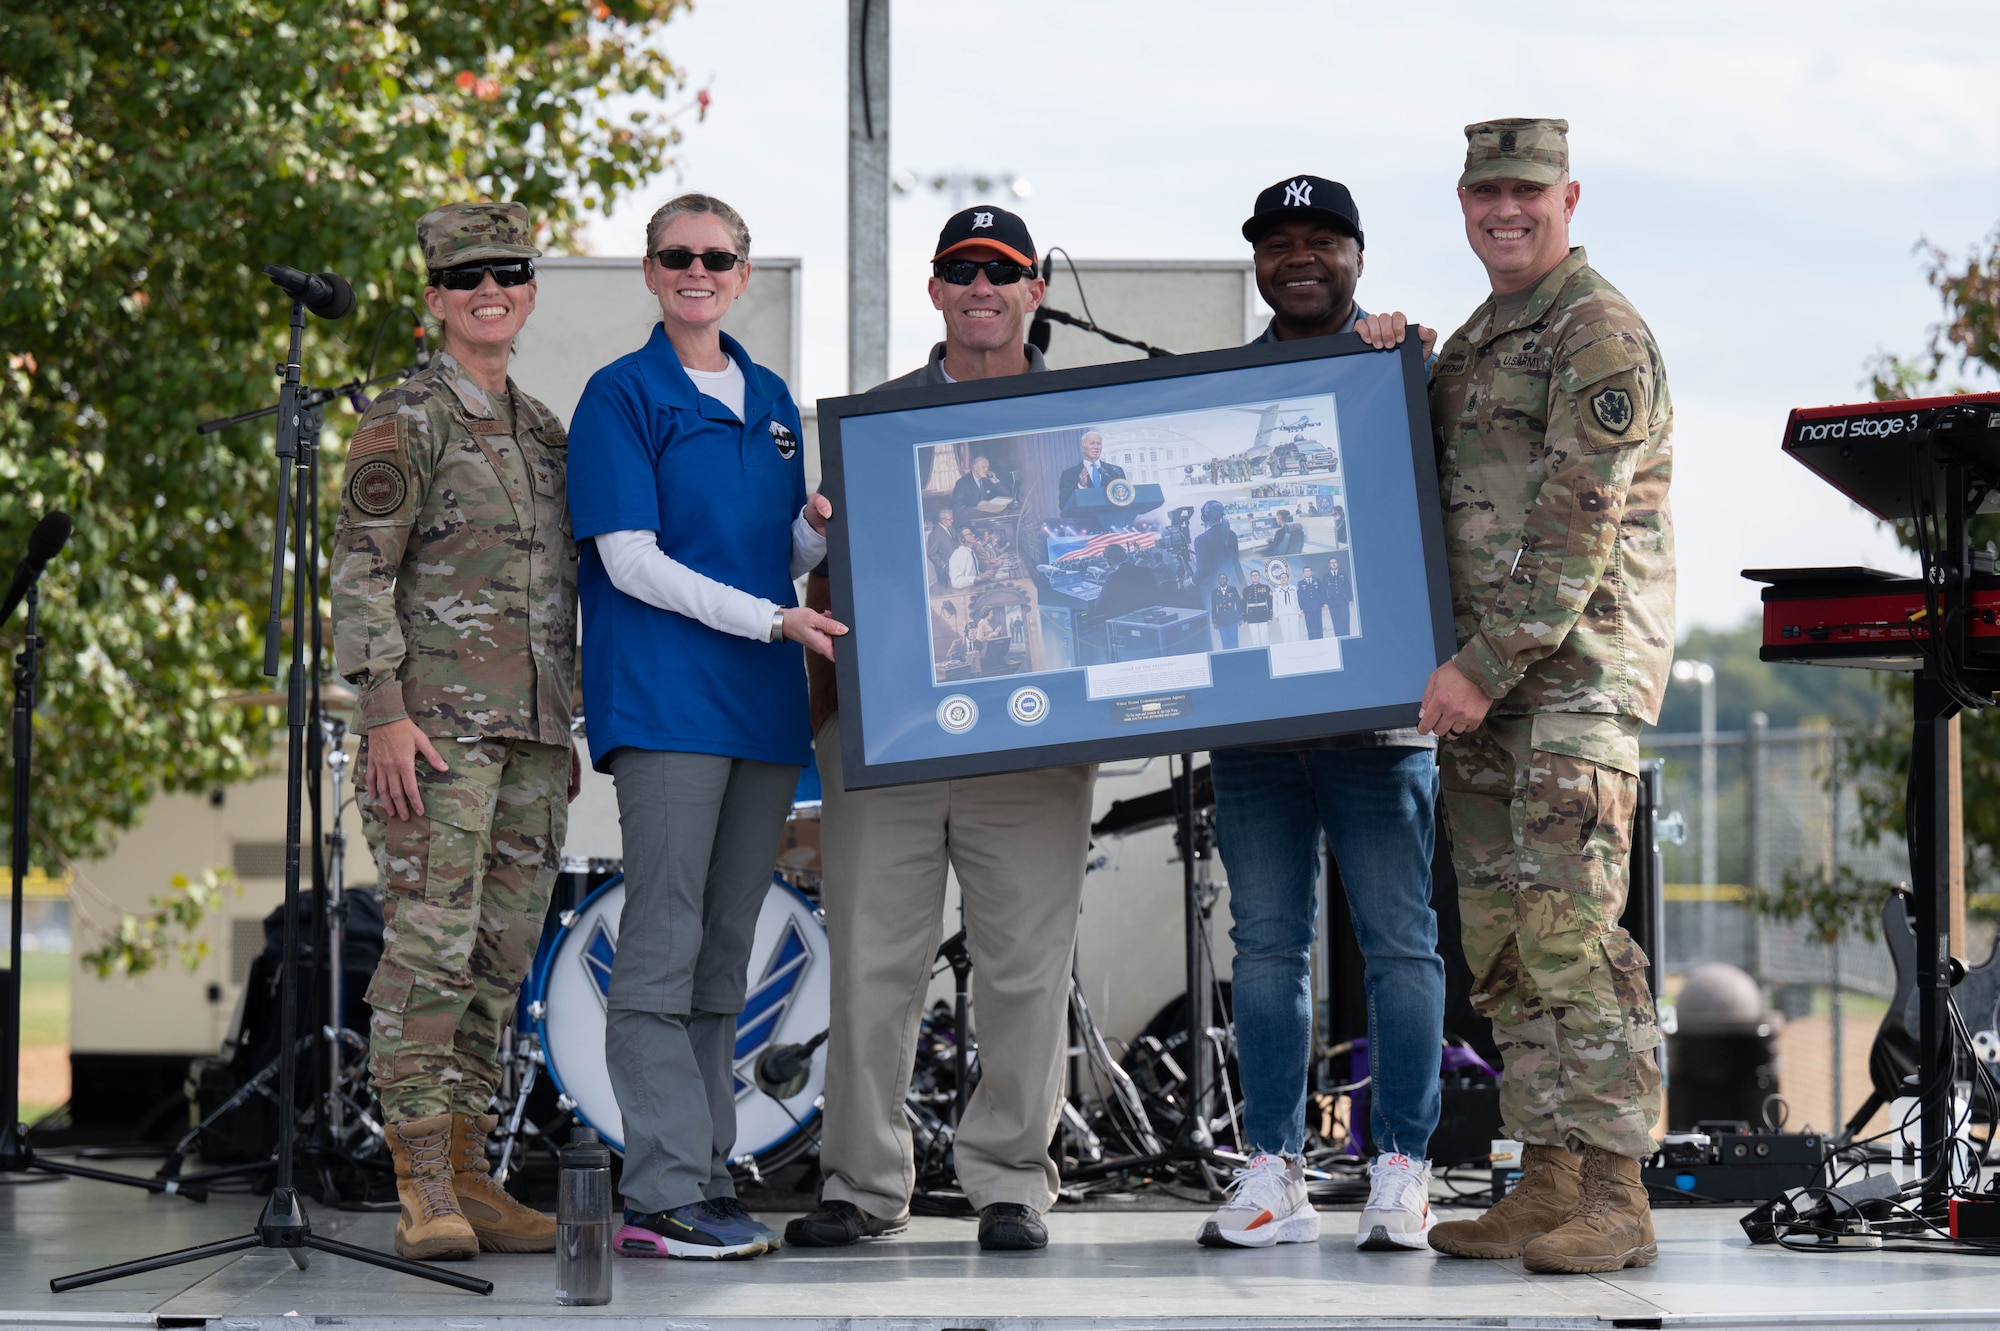 U.S. Air Force Col. Joy Kaczor and U.S. Army Command Sgt. Maj. Sean Mitcham of the White House Communication Agency present a commemorative frame to the 11th Wing command team at the Sentinels Celebration, Joint Base Anacostia-Bolling, Washington, D.C., Oct. 12, 2022. Mission partners and units across the National Capital Region came together to celebrate the base reaching Full Operational Capability after the first-ever Department of Defense lead service transfer in 2020. (U.S. Air Force photo by Kristen Wong)